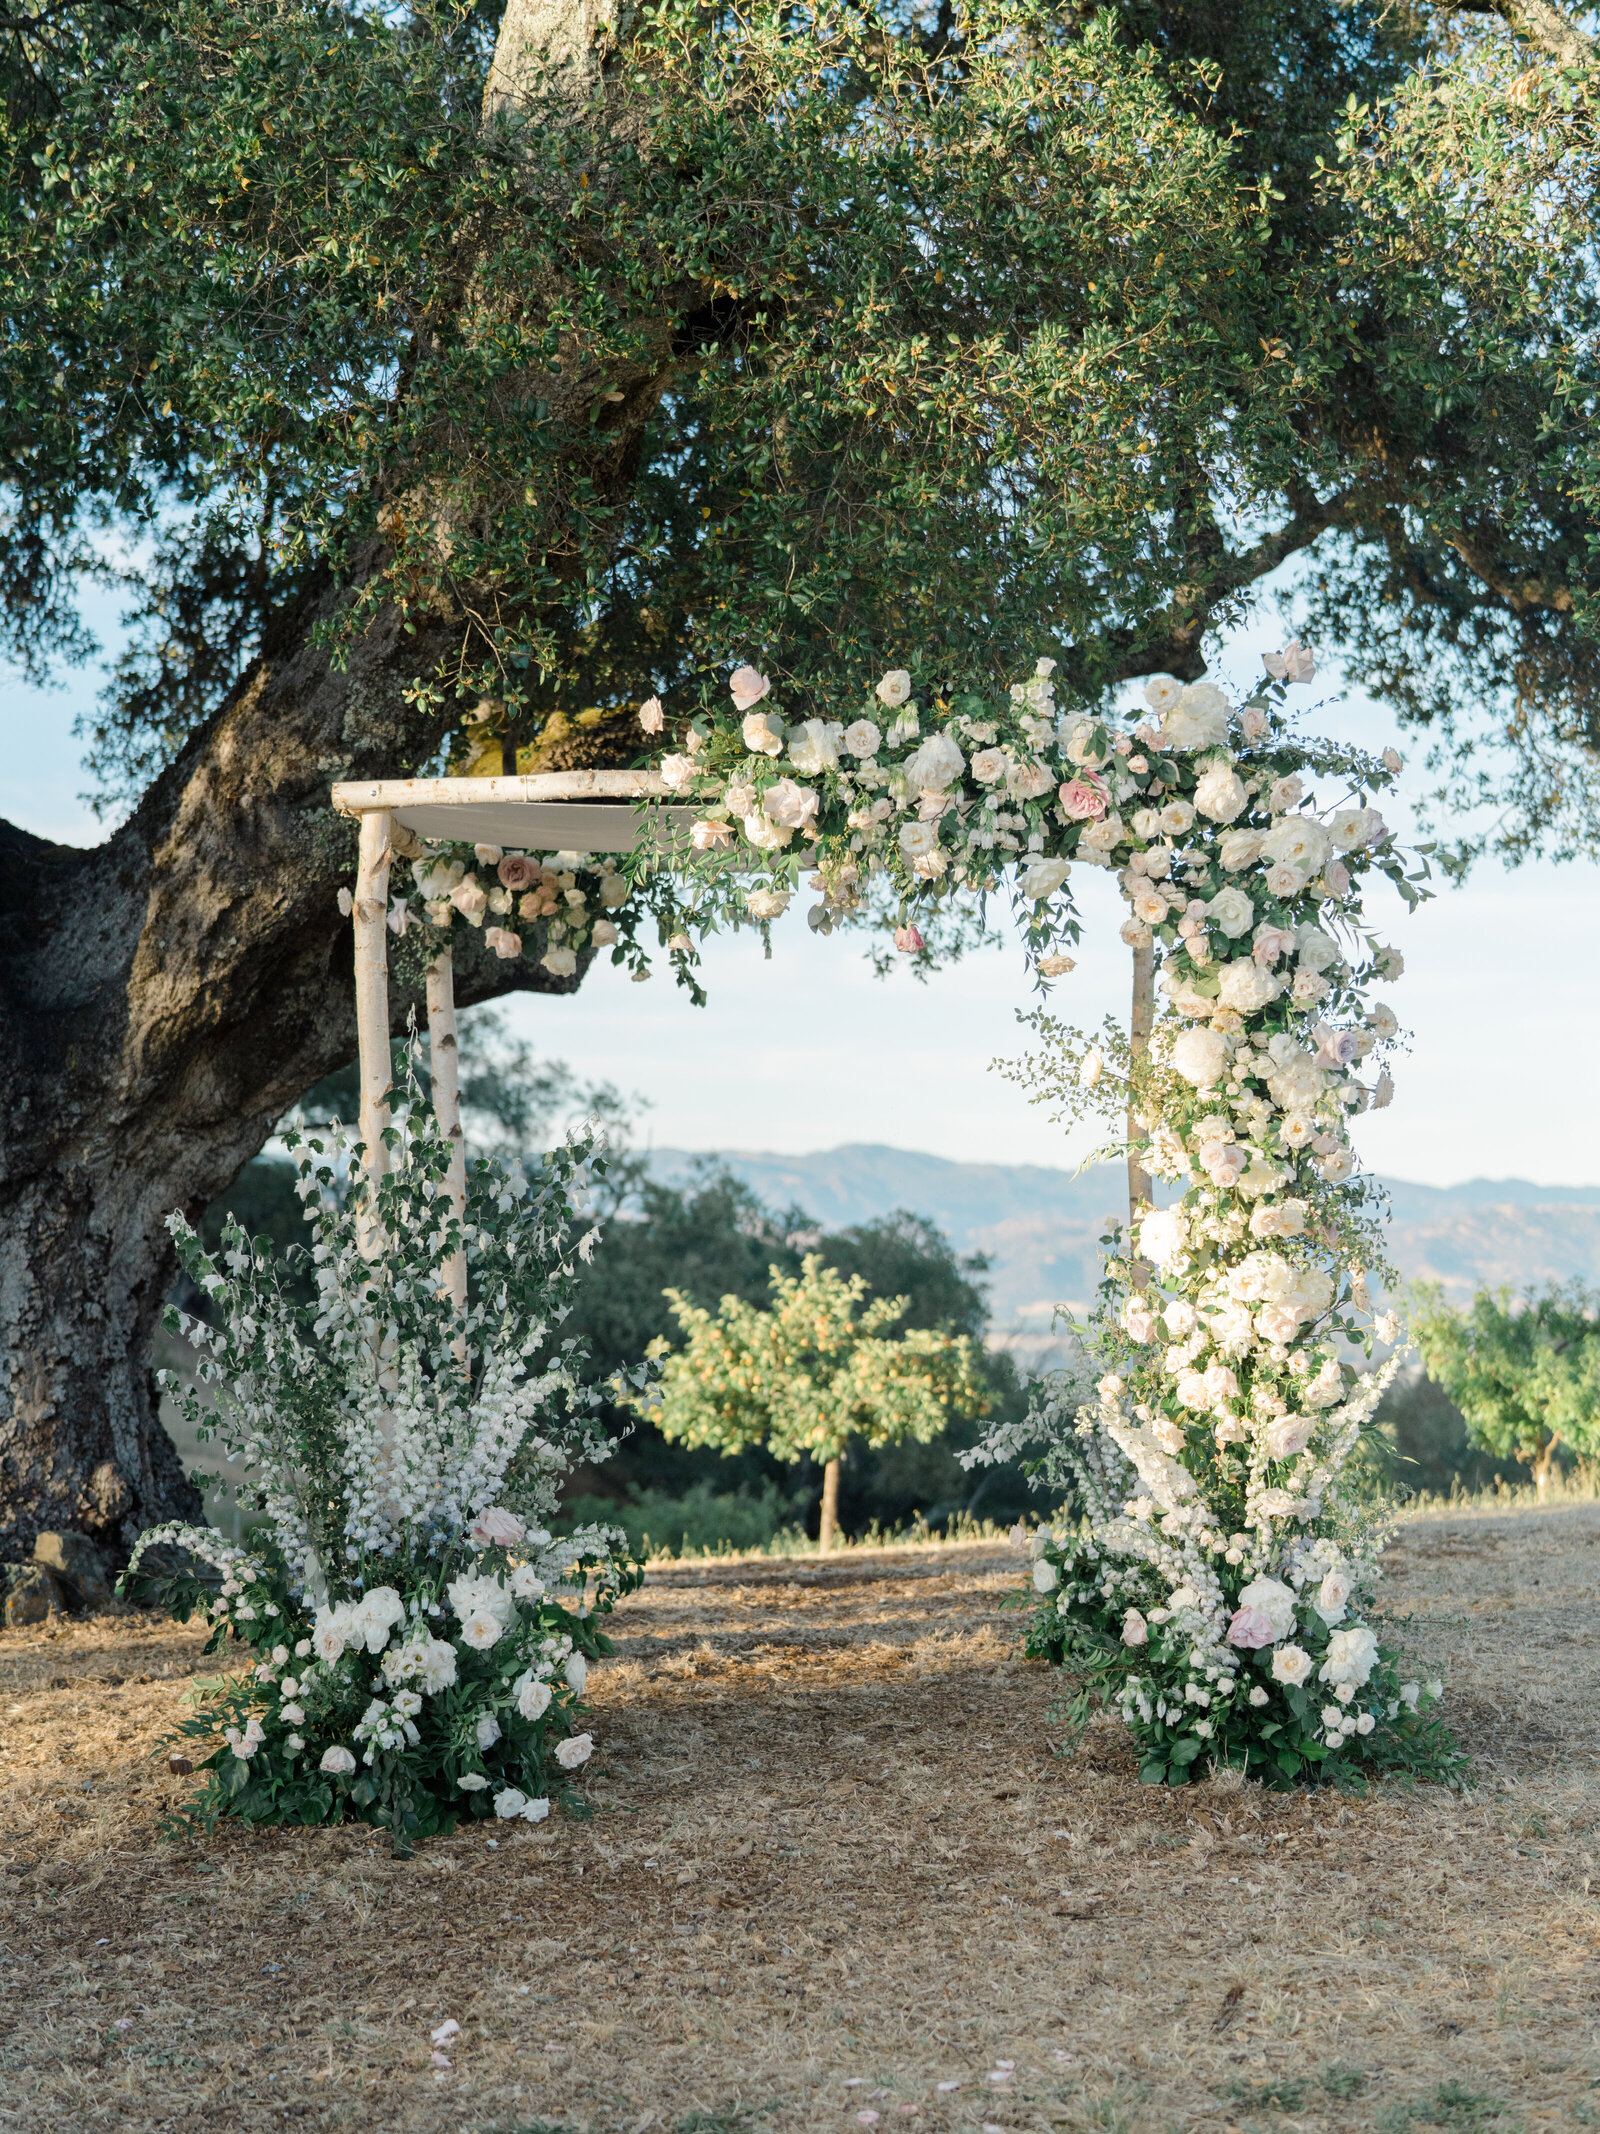 arbor with white roses under a large old tree